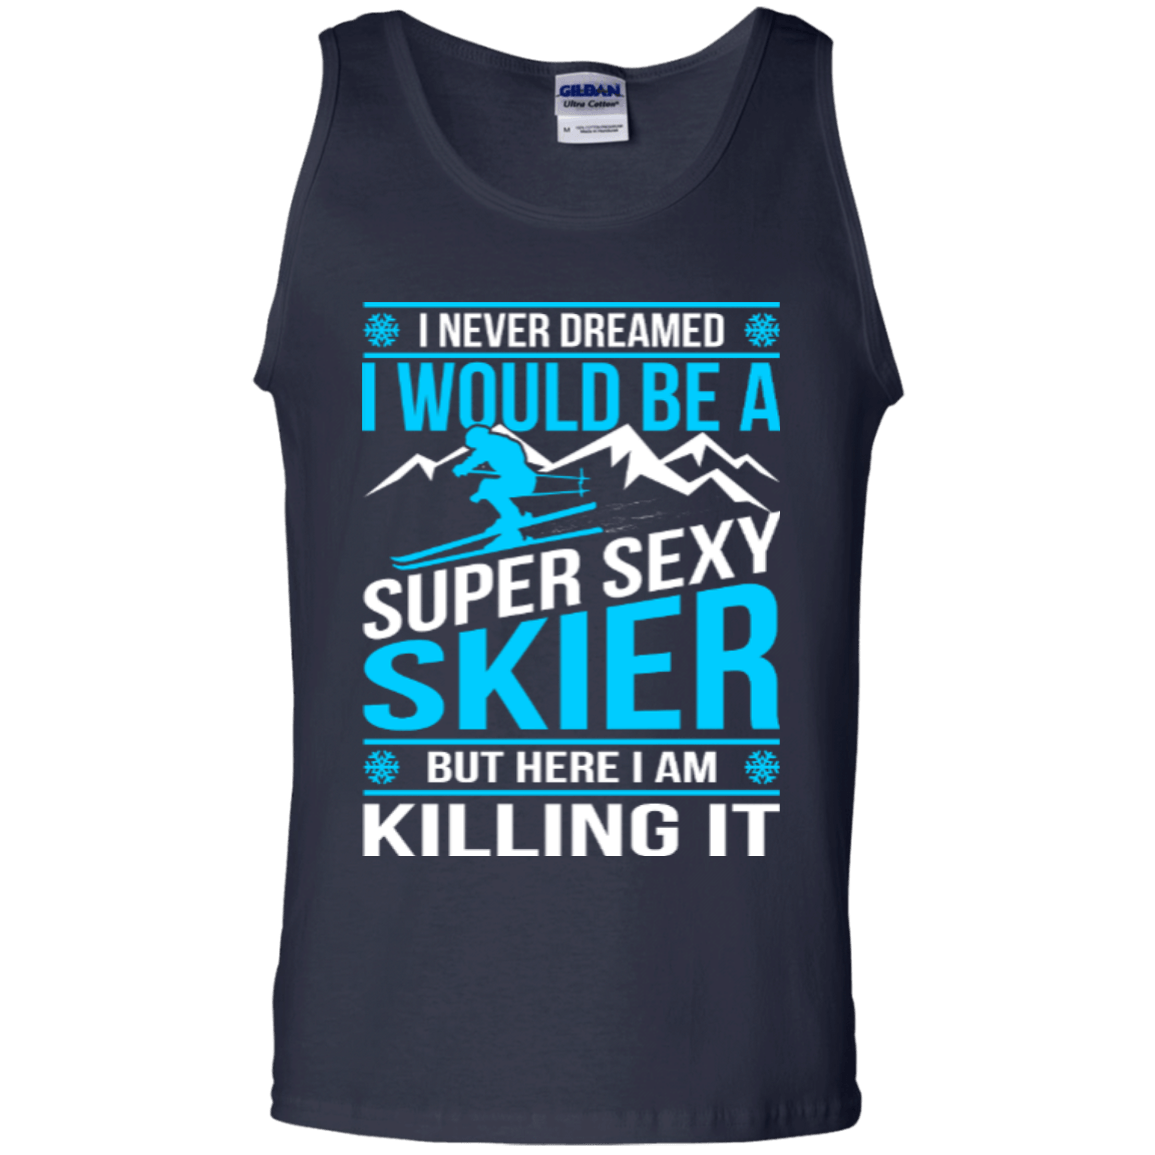 I Never Dreamed I Would Be A Super Sexy Skier But Here I Am Killing It Tank Tops - Powderaddicts